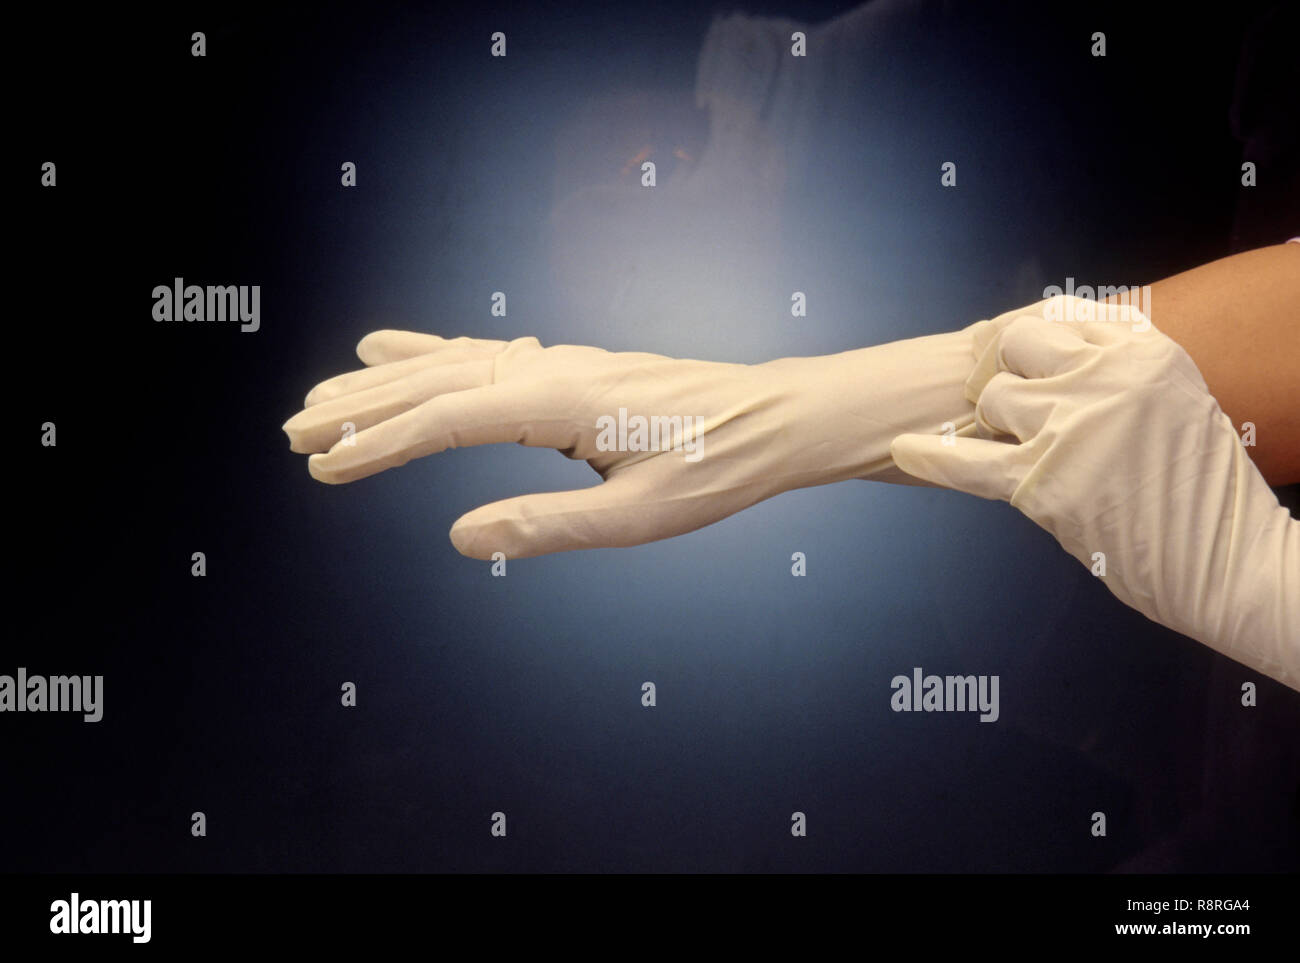 surgeons hands wearing rubber gloves Stock Photo